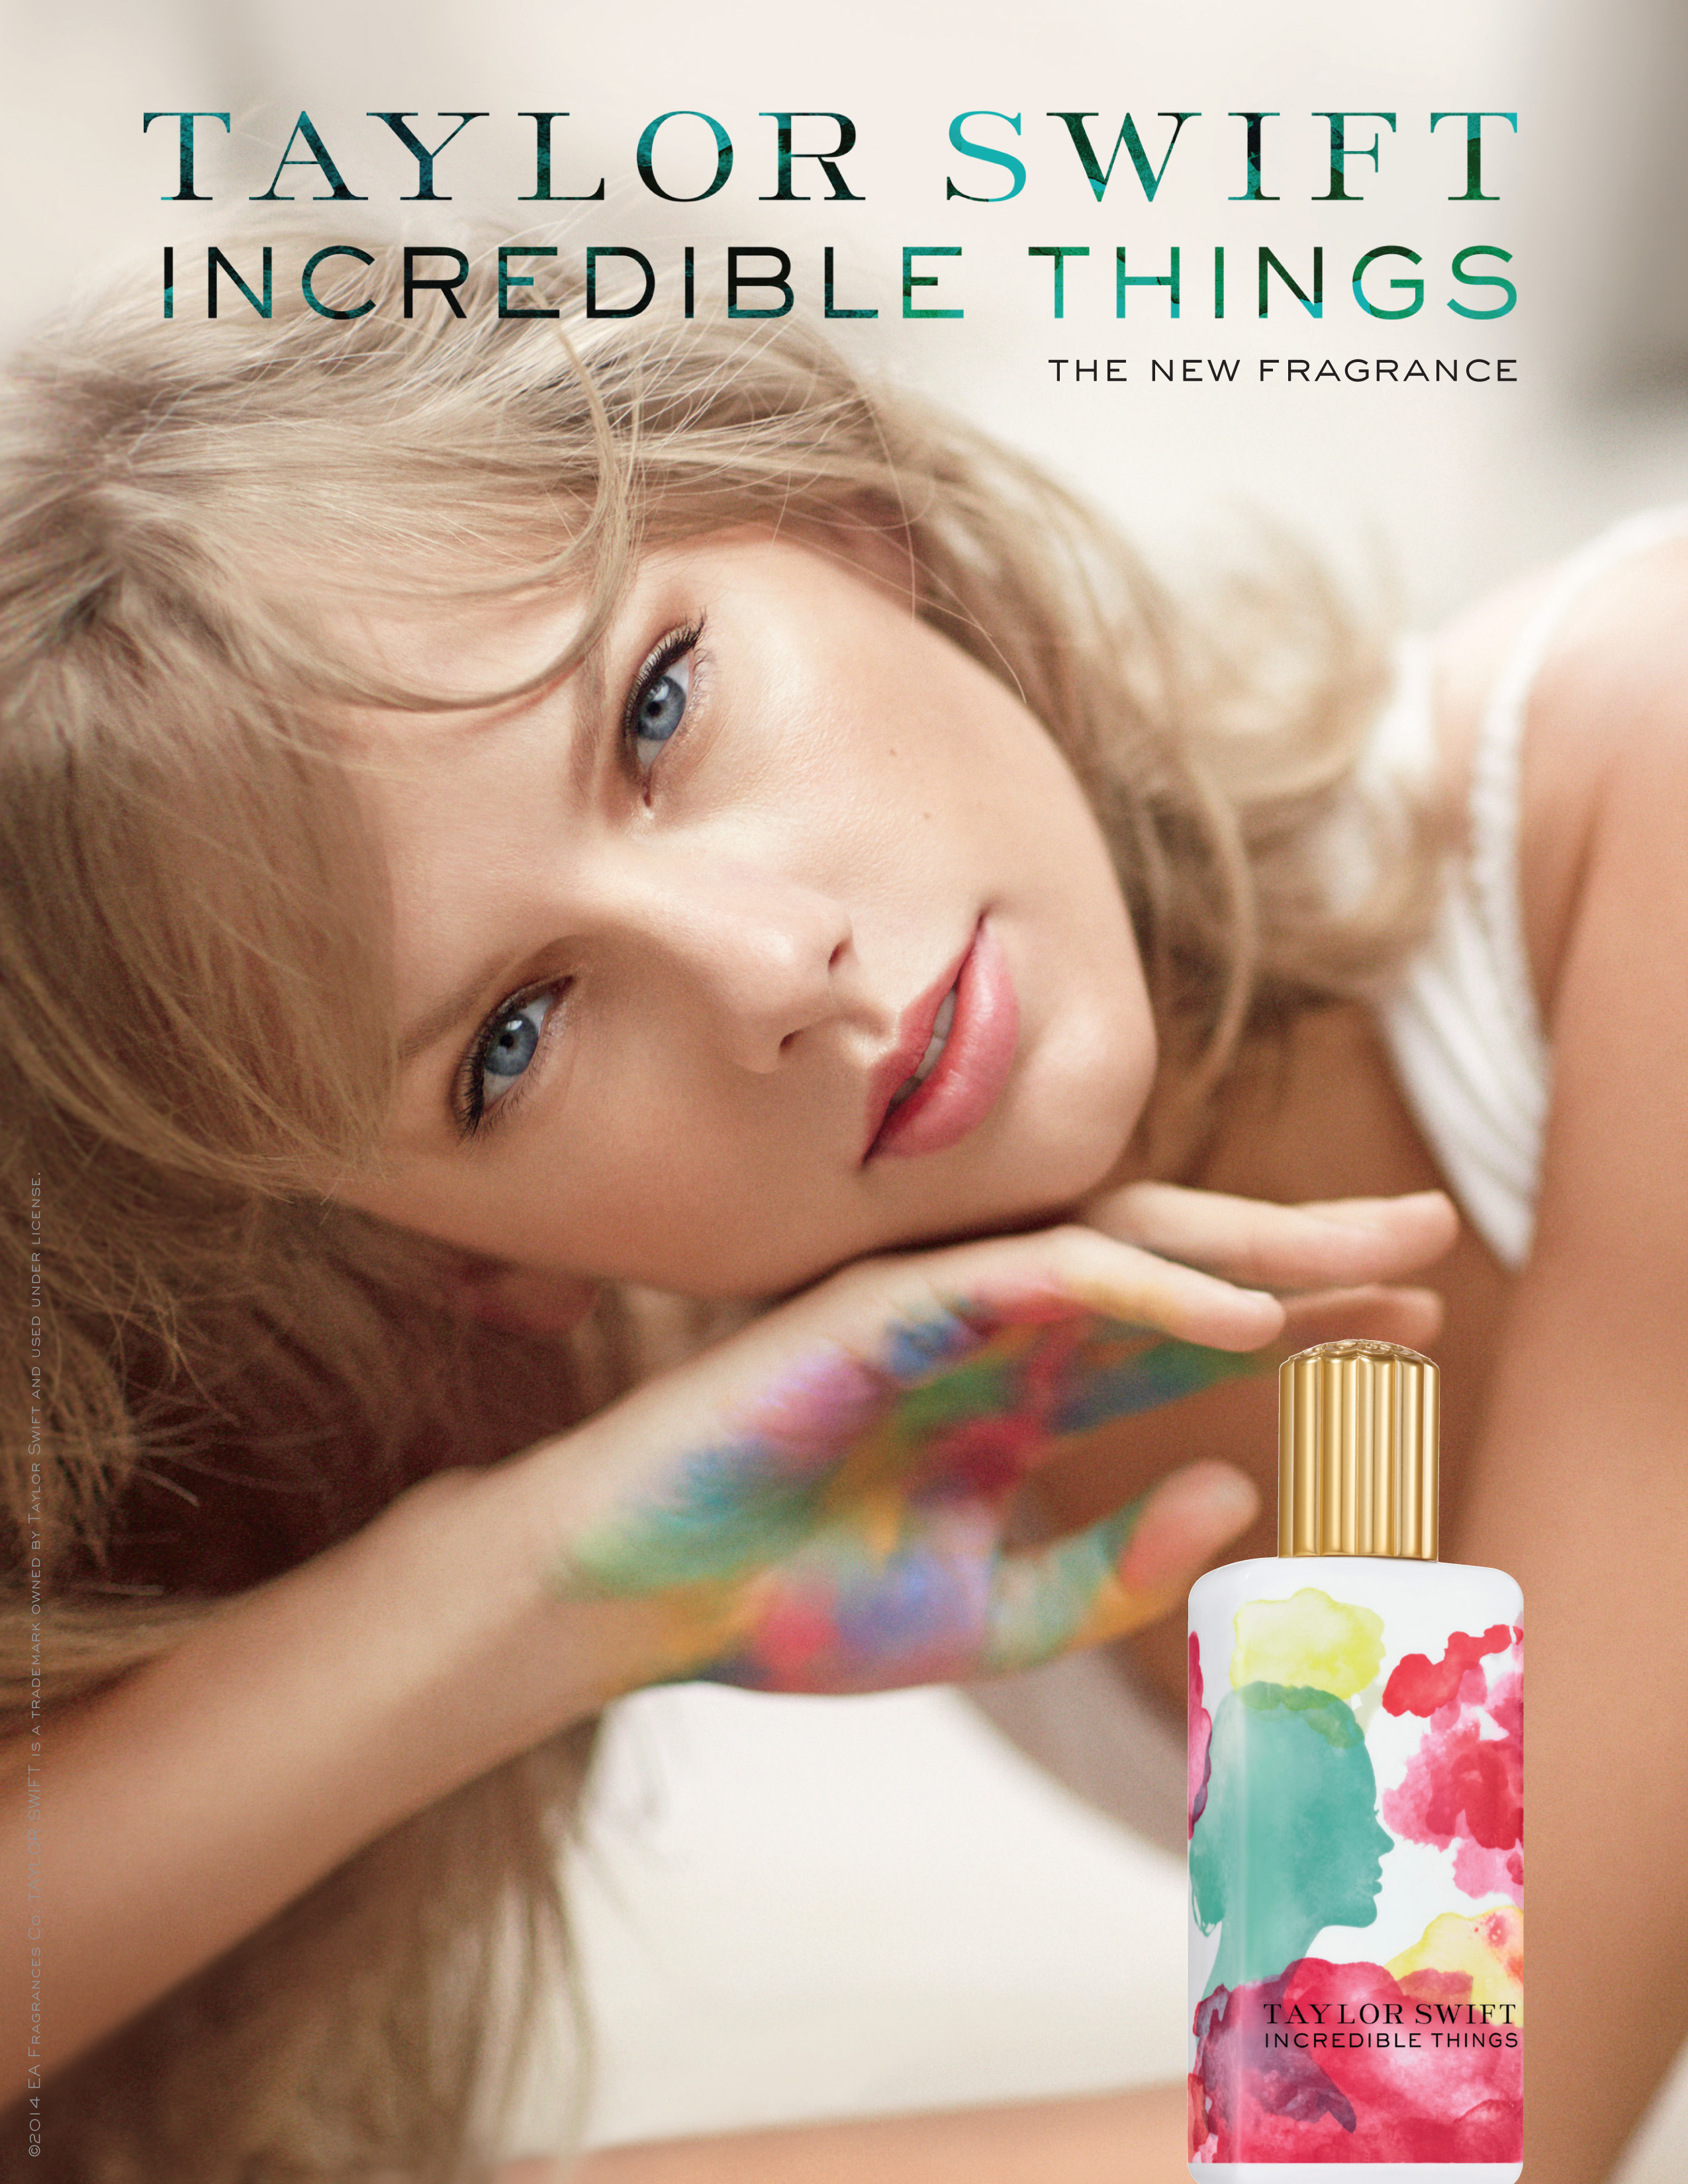 Taylor Swift Incredible Things Ad